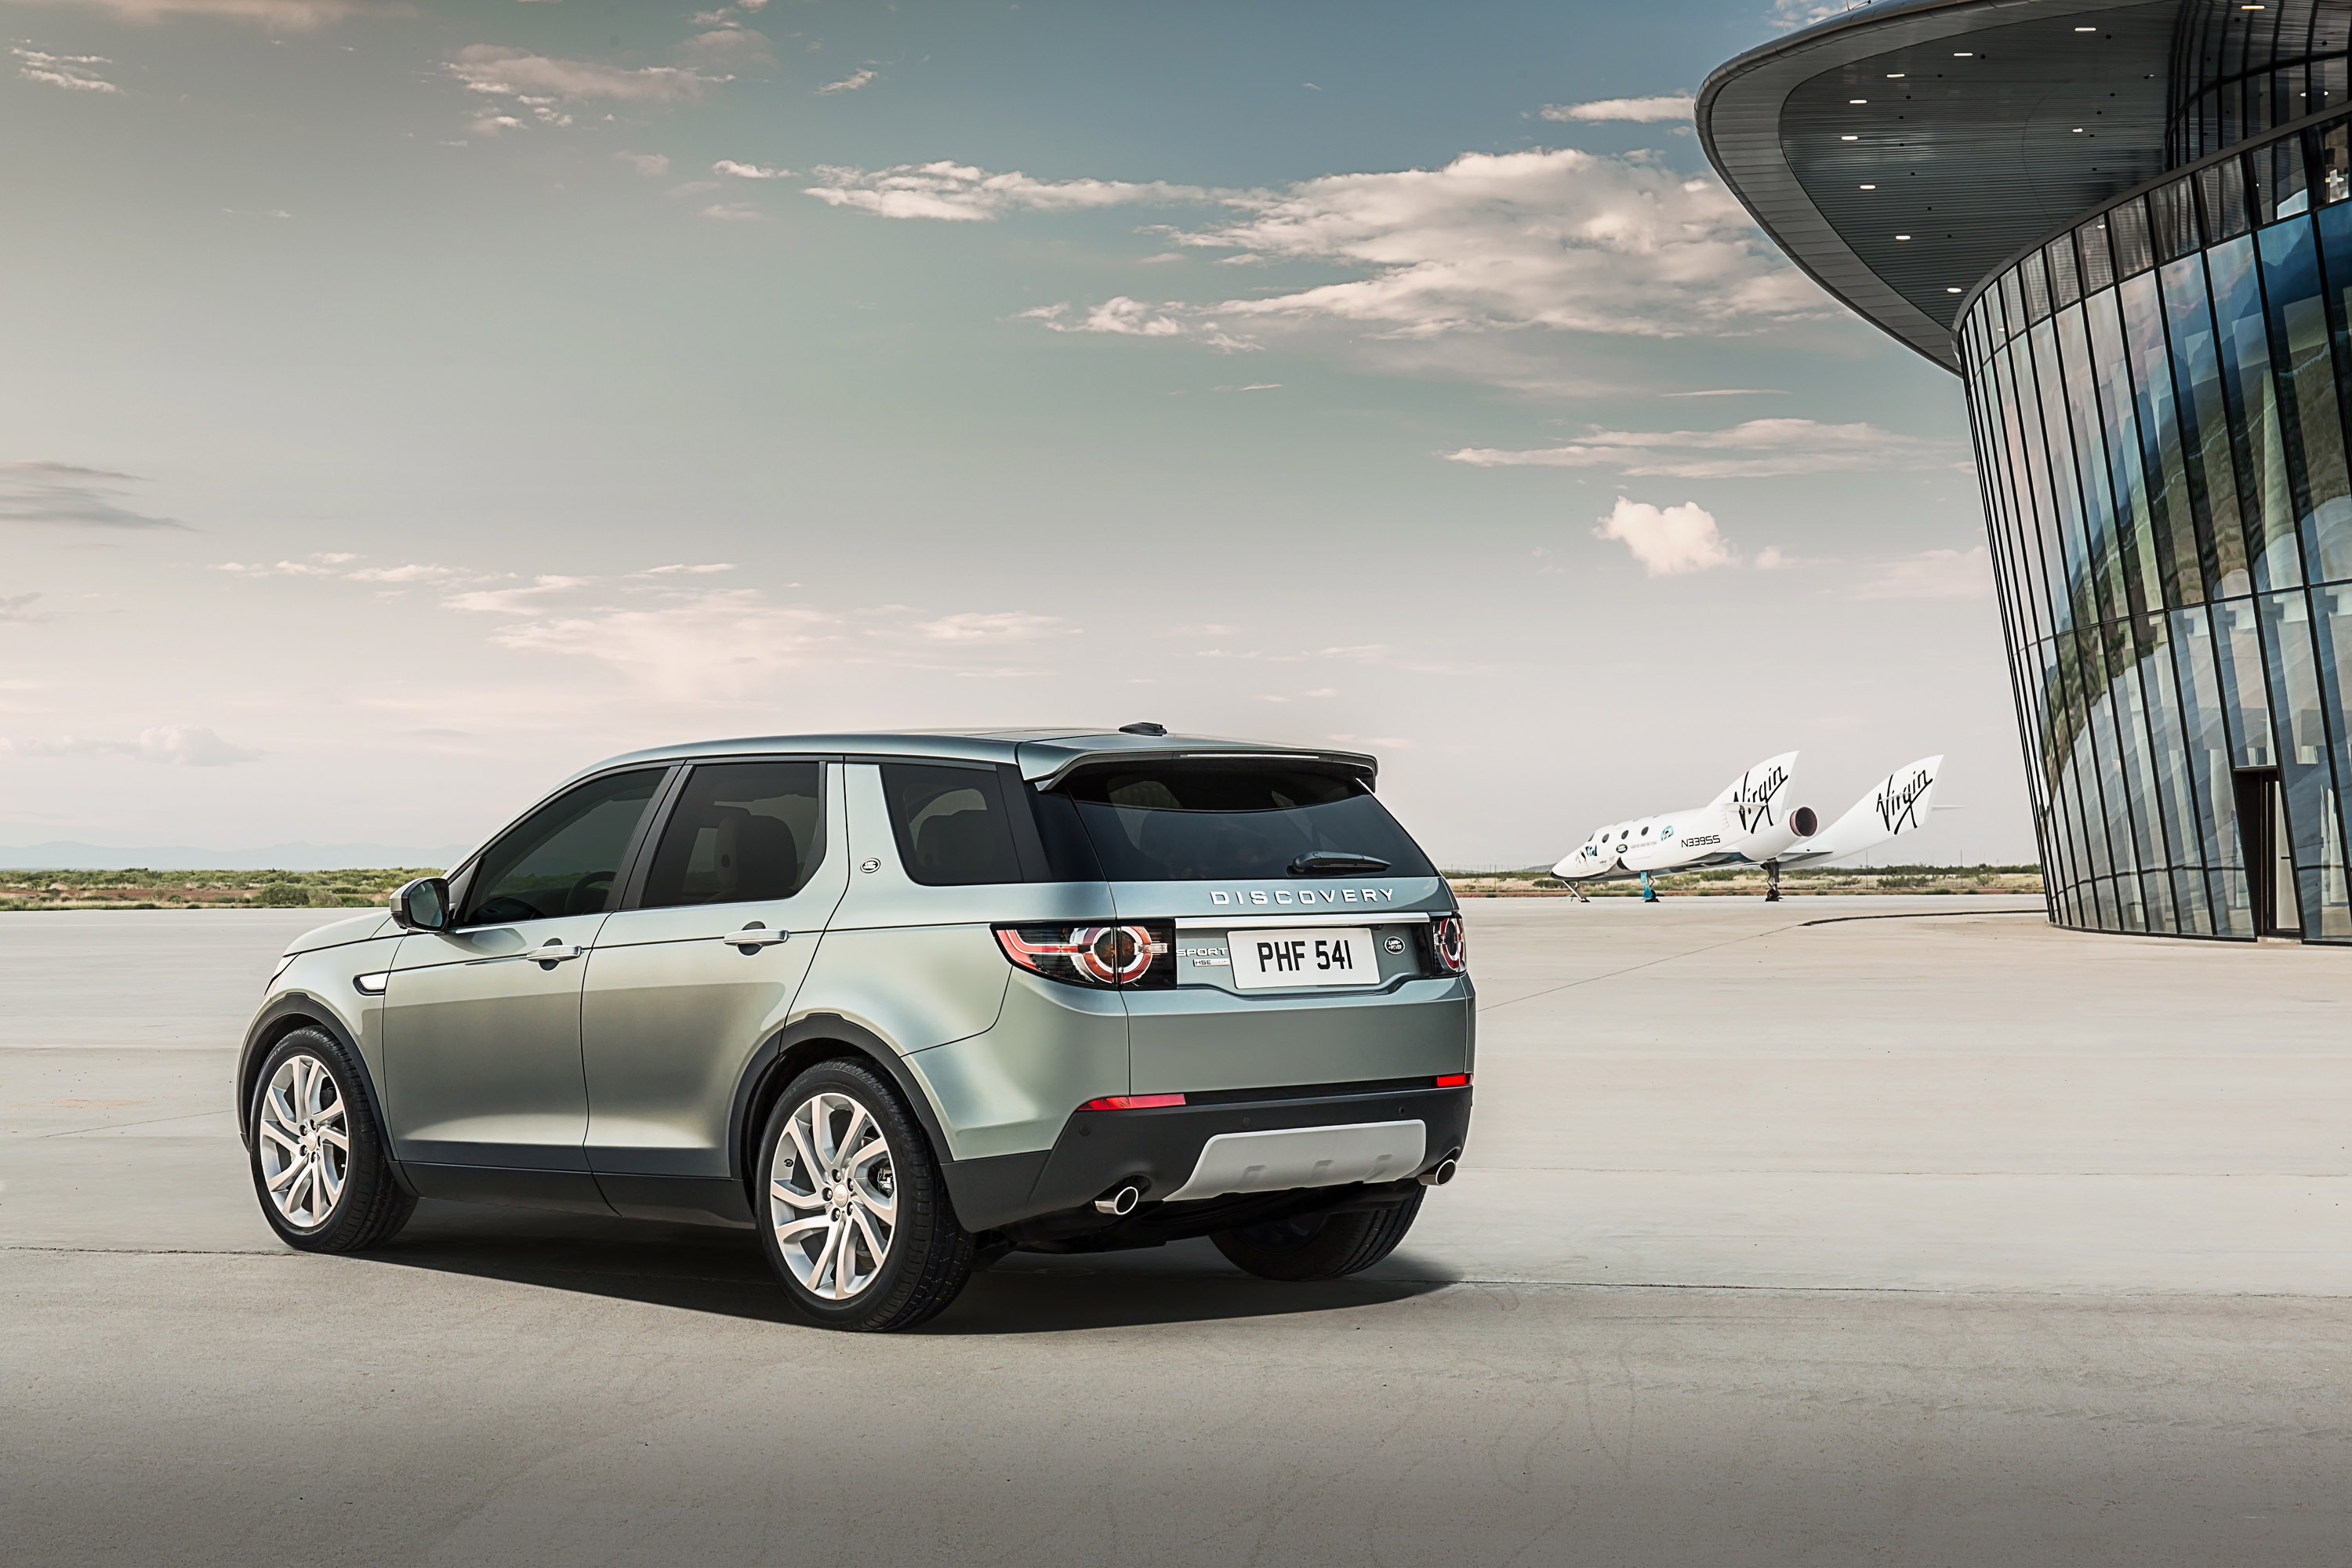 Land rover sport 2015. Land Rover Discovery Sport 2015. Ленд Ровер Дискавери спорт 2015. Range Rover Discovery Sport 2015. Ленд Ровер Дискавери 2015.